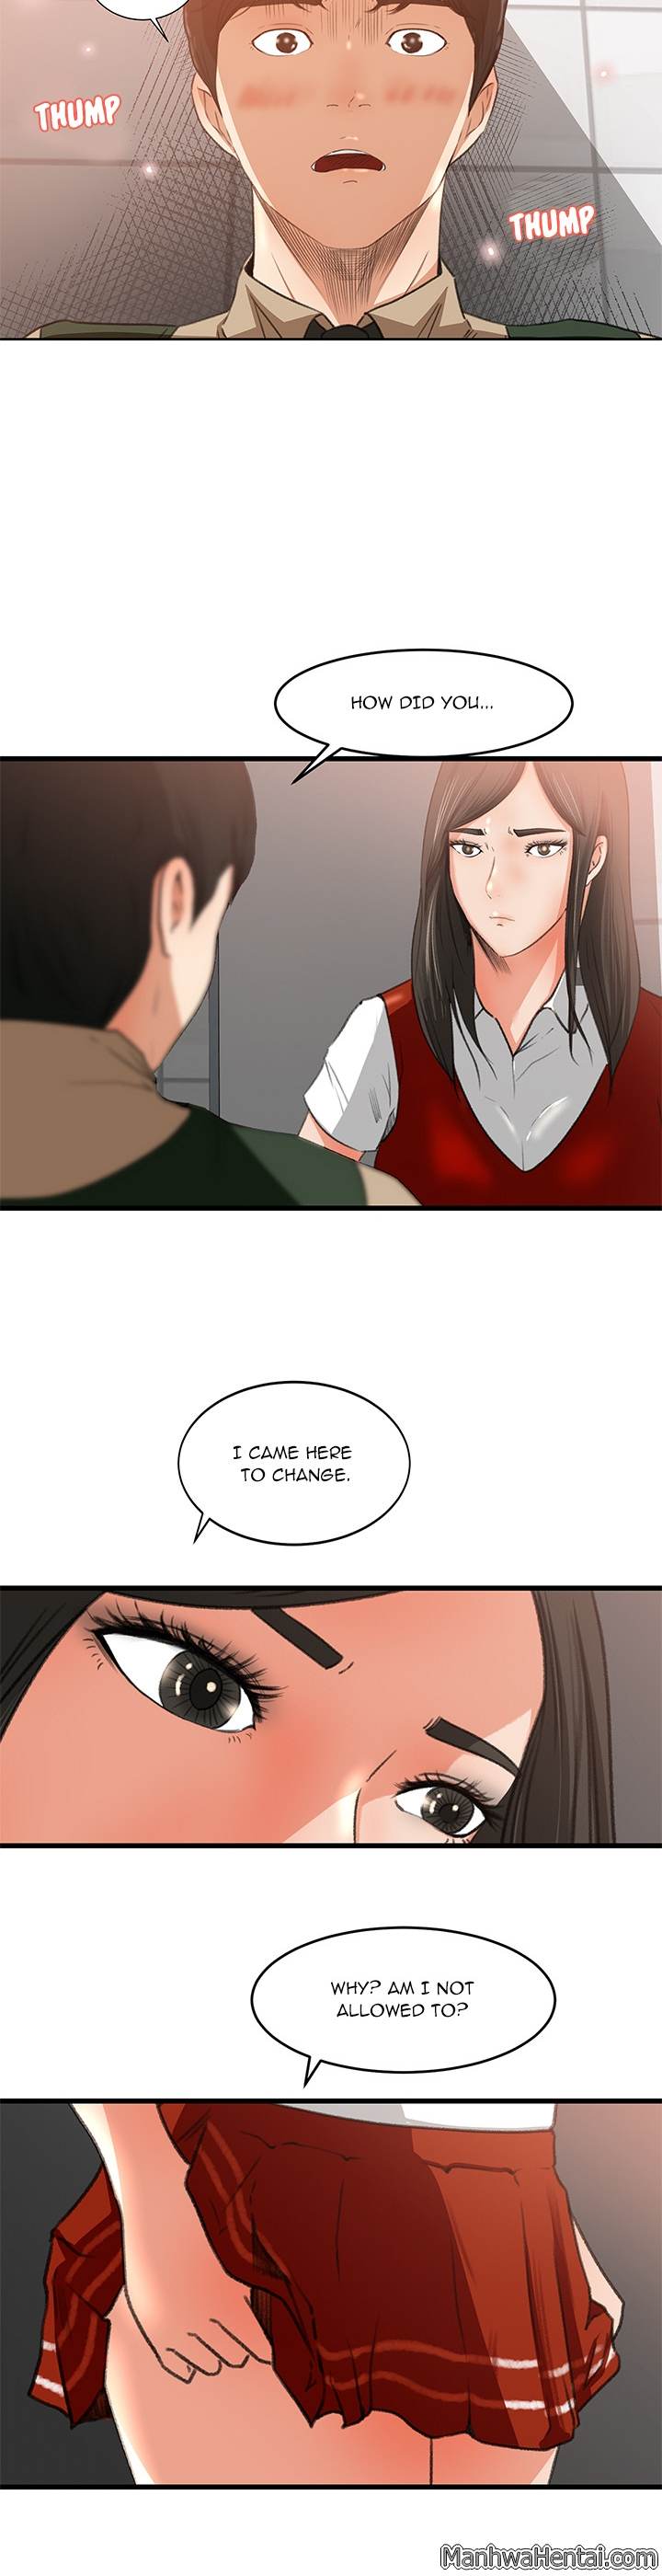 Inside the Uniform - Chapter 7 Page 2